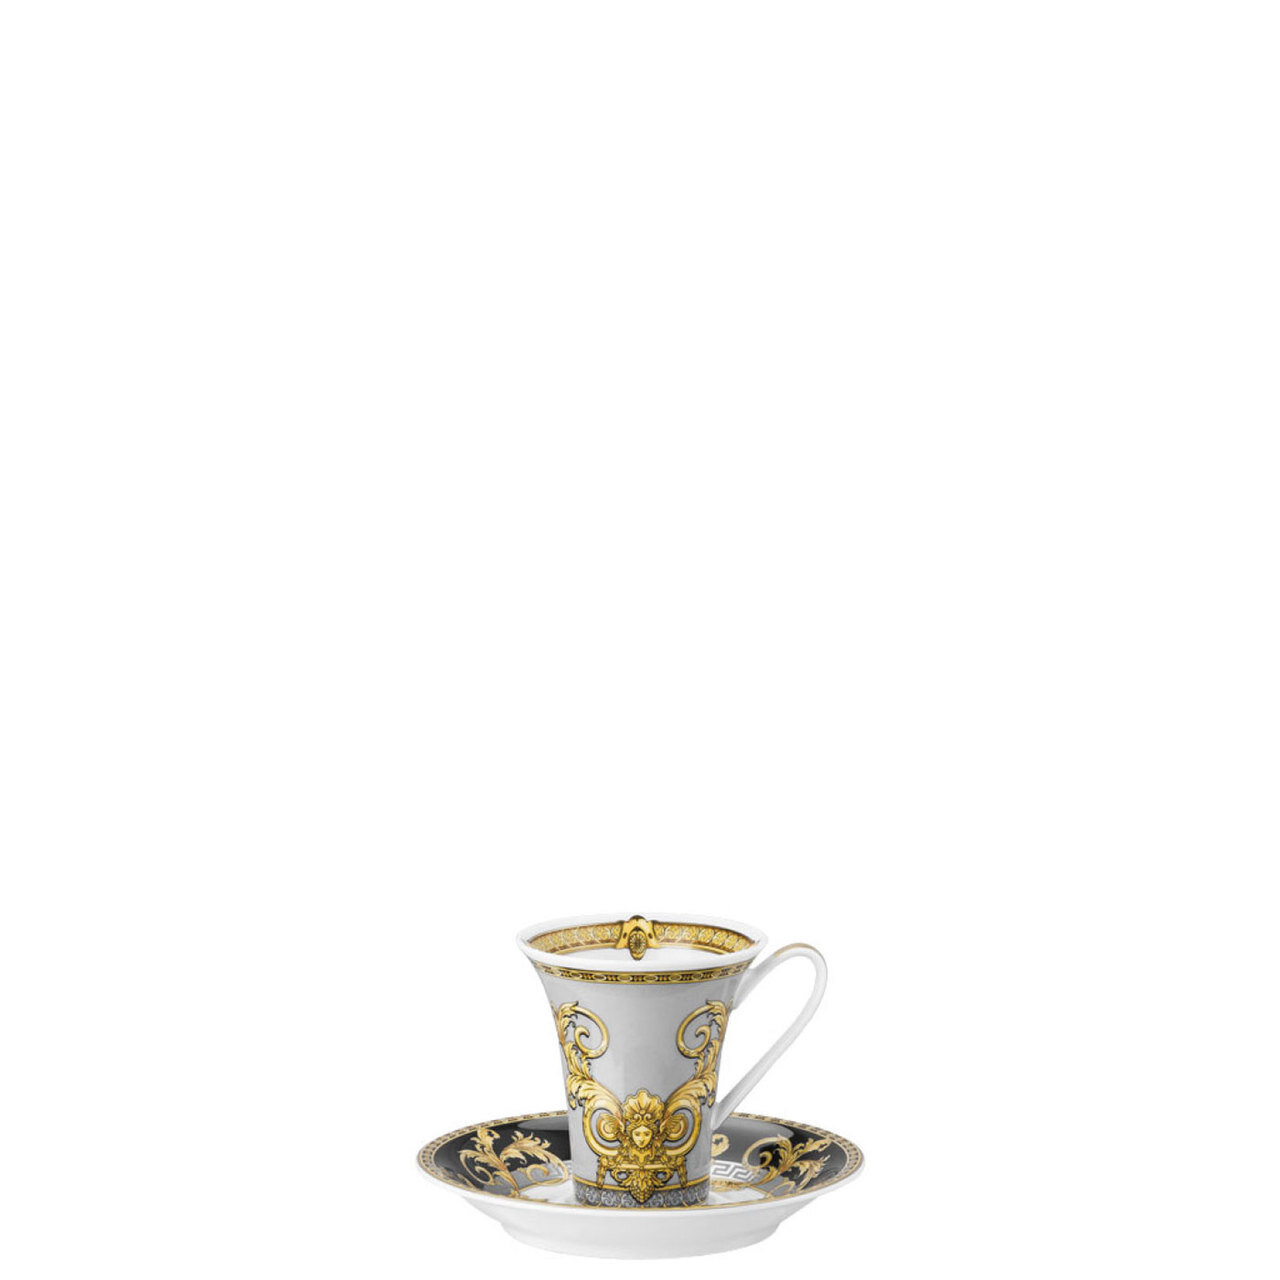 Versace Prestige Gala AD Cup and Saucer 3 oz.